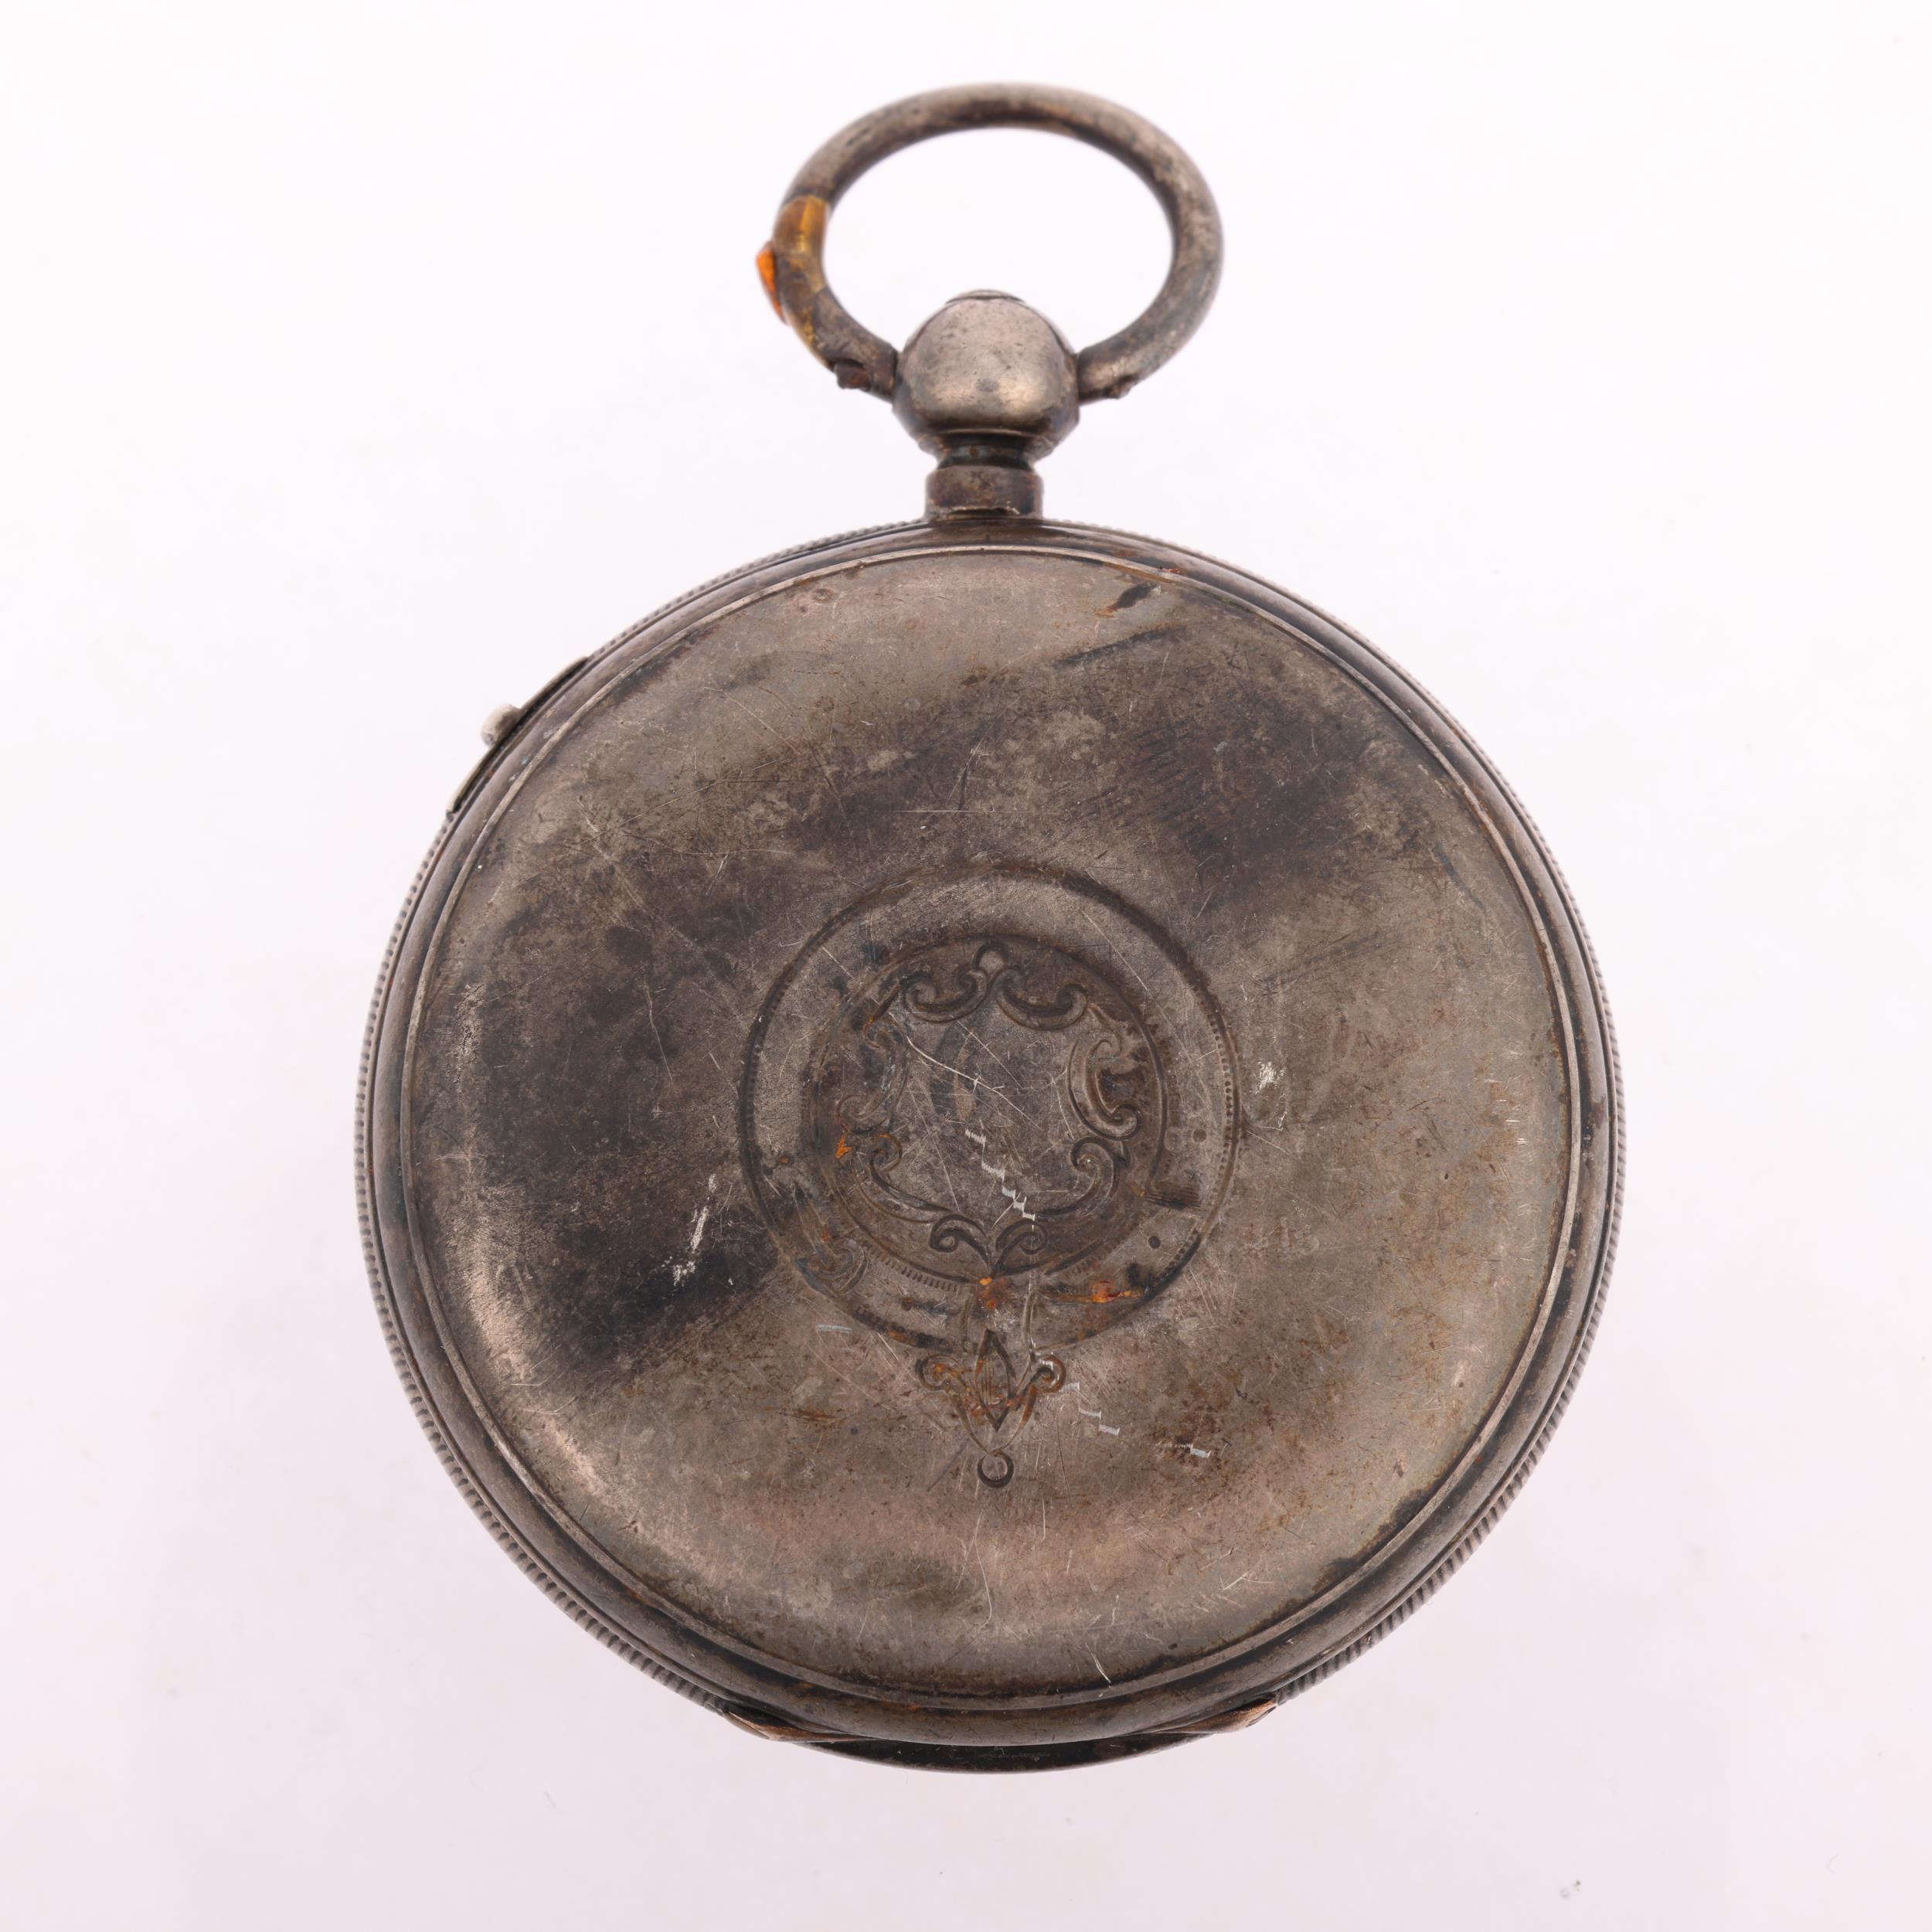 A 19th century silver-cased open-face key-wind chronograph pocket watch, white enamel dial with - Image 2 of 5